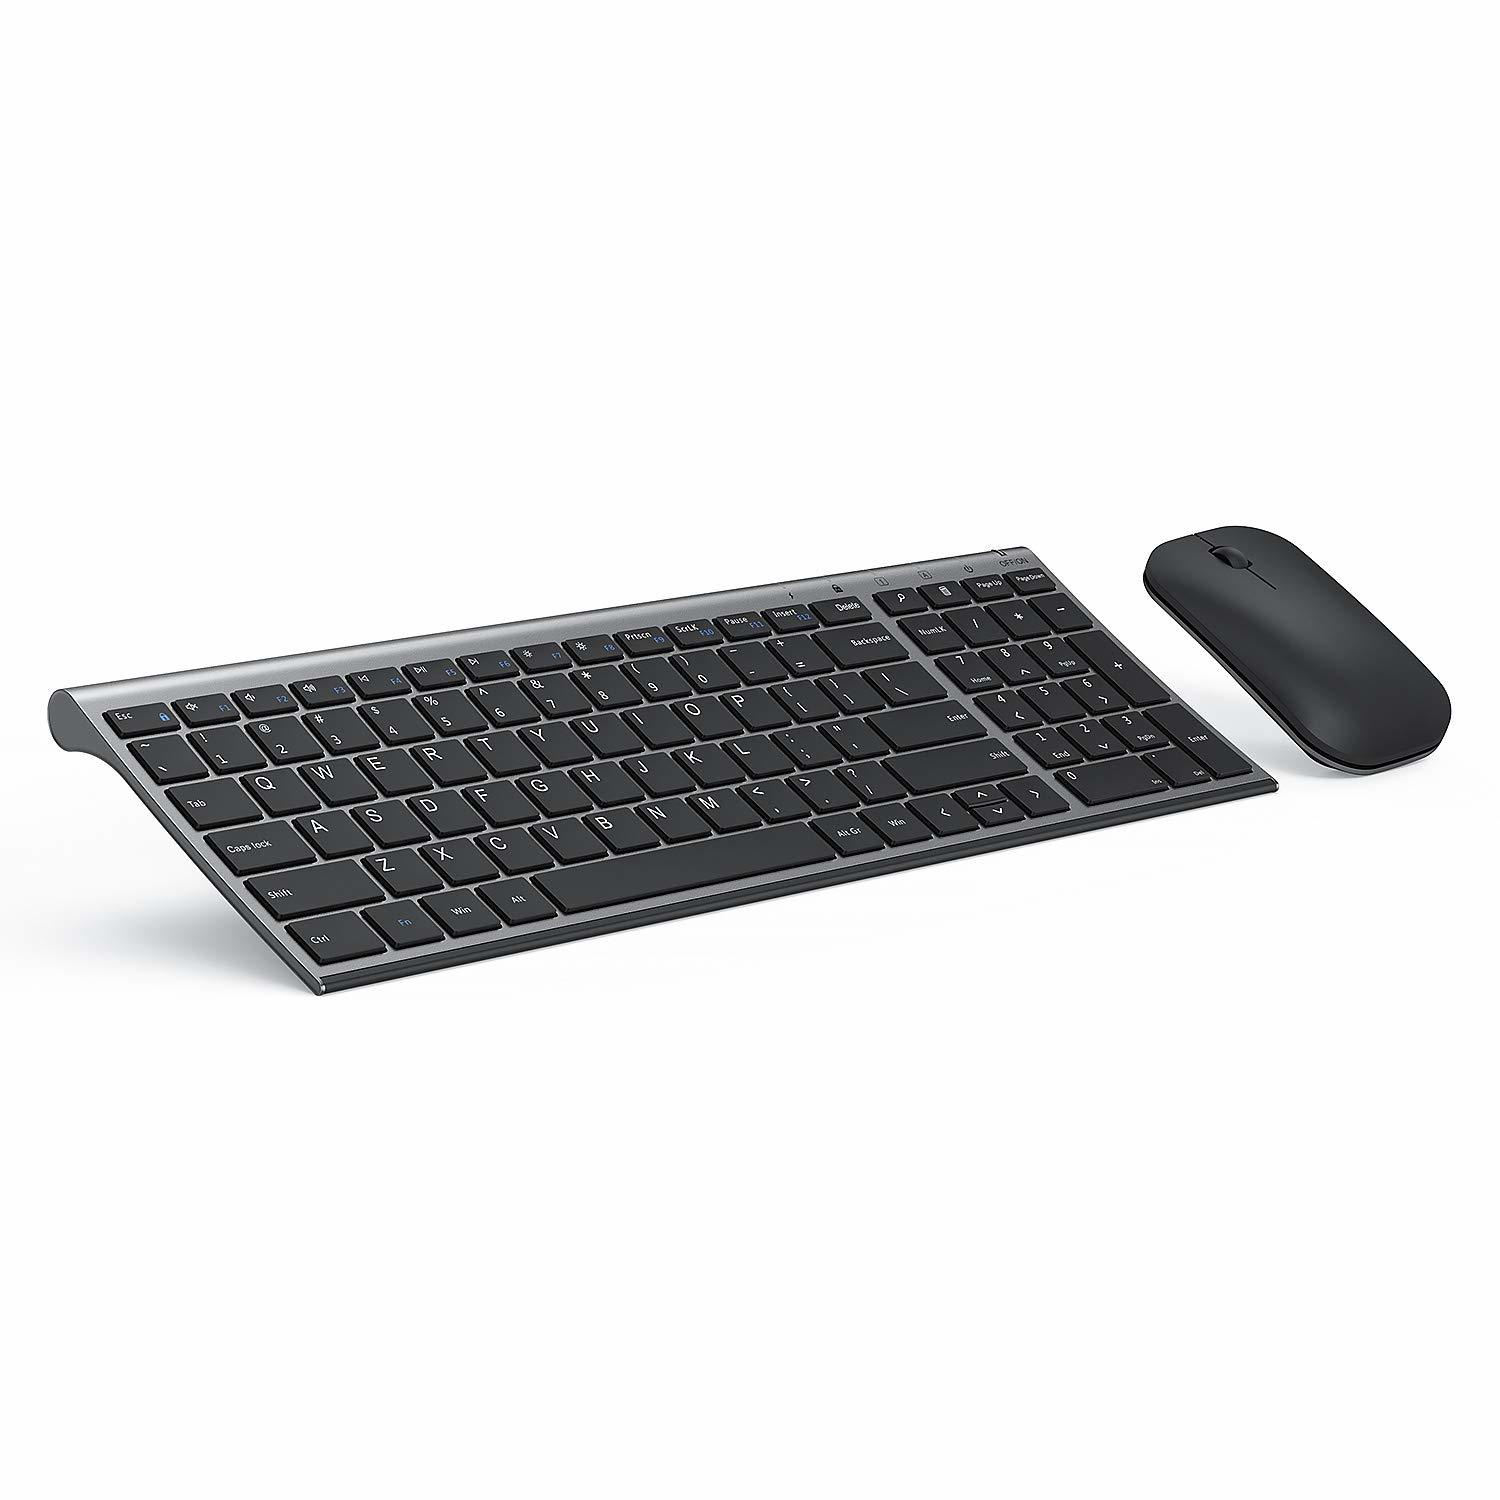 Primary image for Rechargeable Wireless Keyboard Mouse, seenda Slim Thin Low Profile Keyboard and 